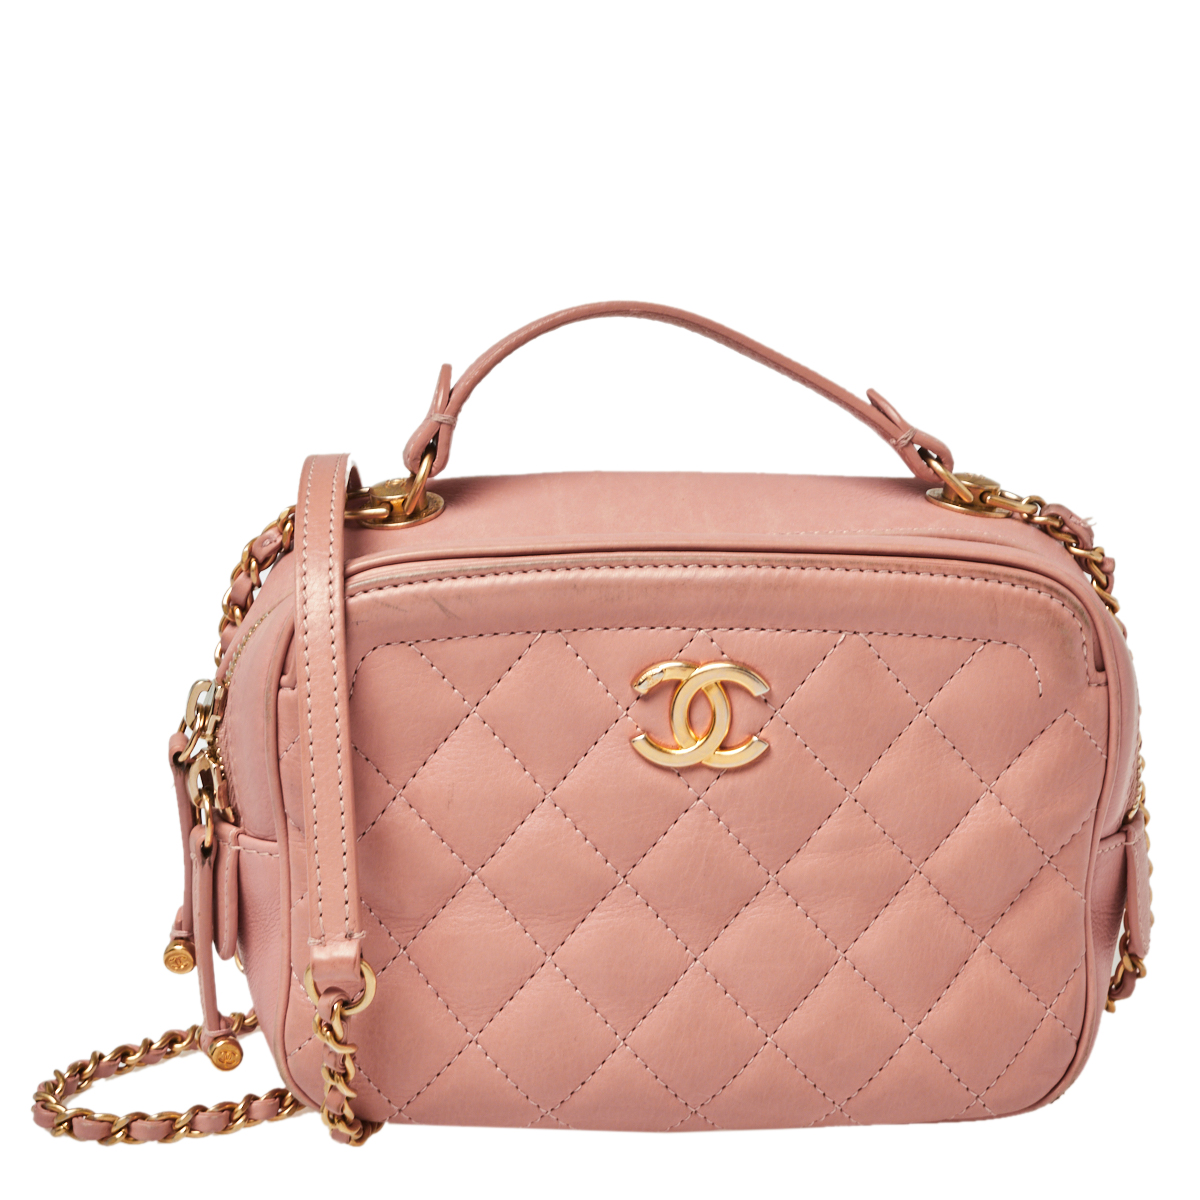 Pre-owned Chanel Blush Pink Quilted Leather Small Vanity Case Bag